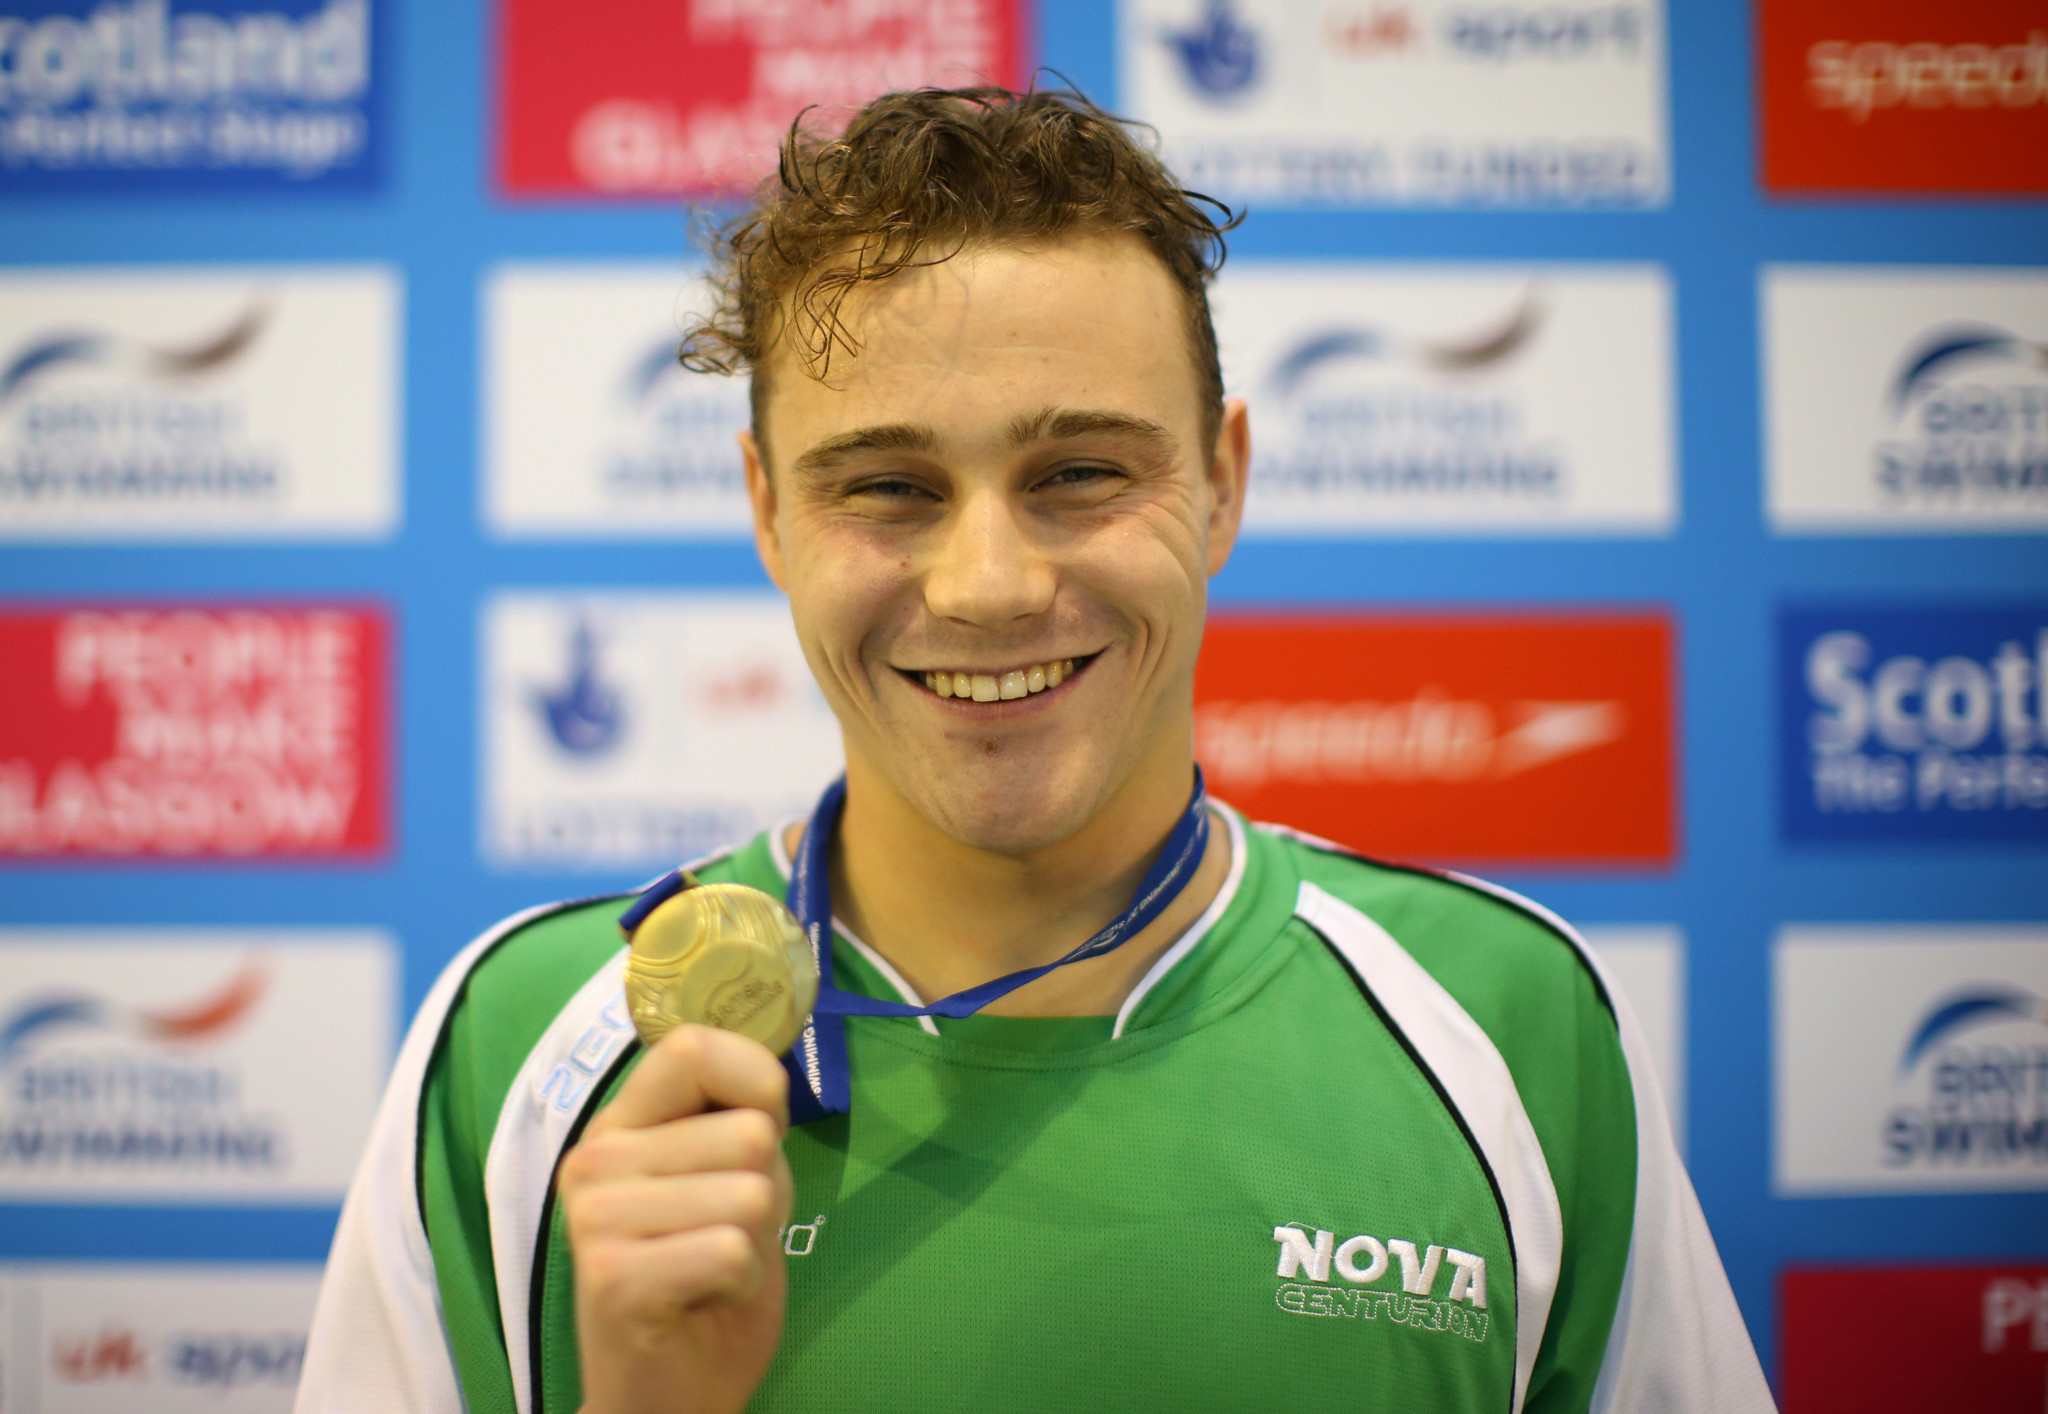 Paralympic swimming champion Hynd has reclassification appeal upheld as compatriot Wylie retires